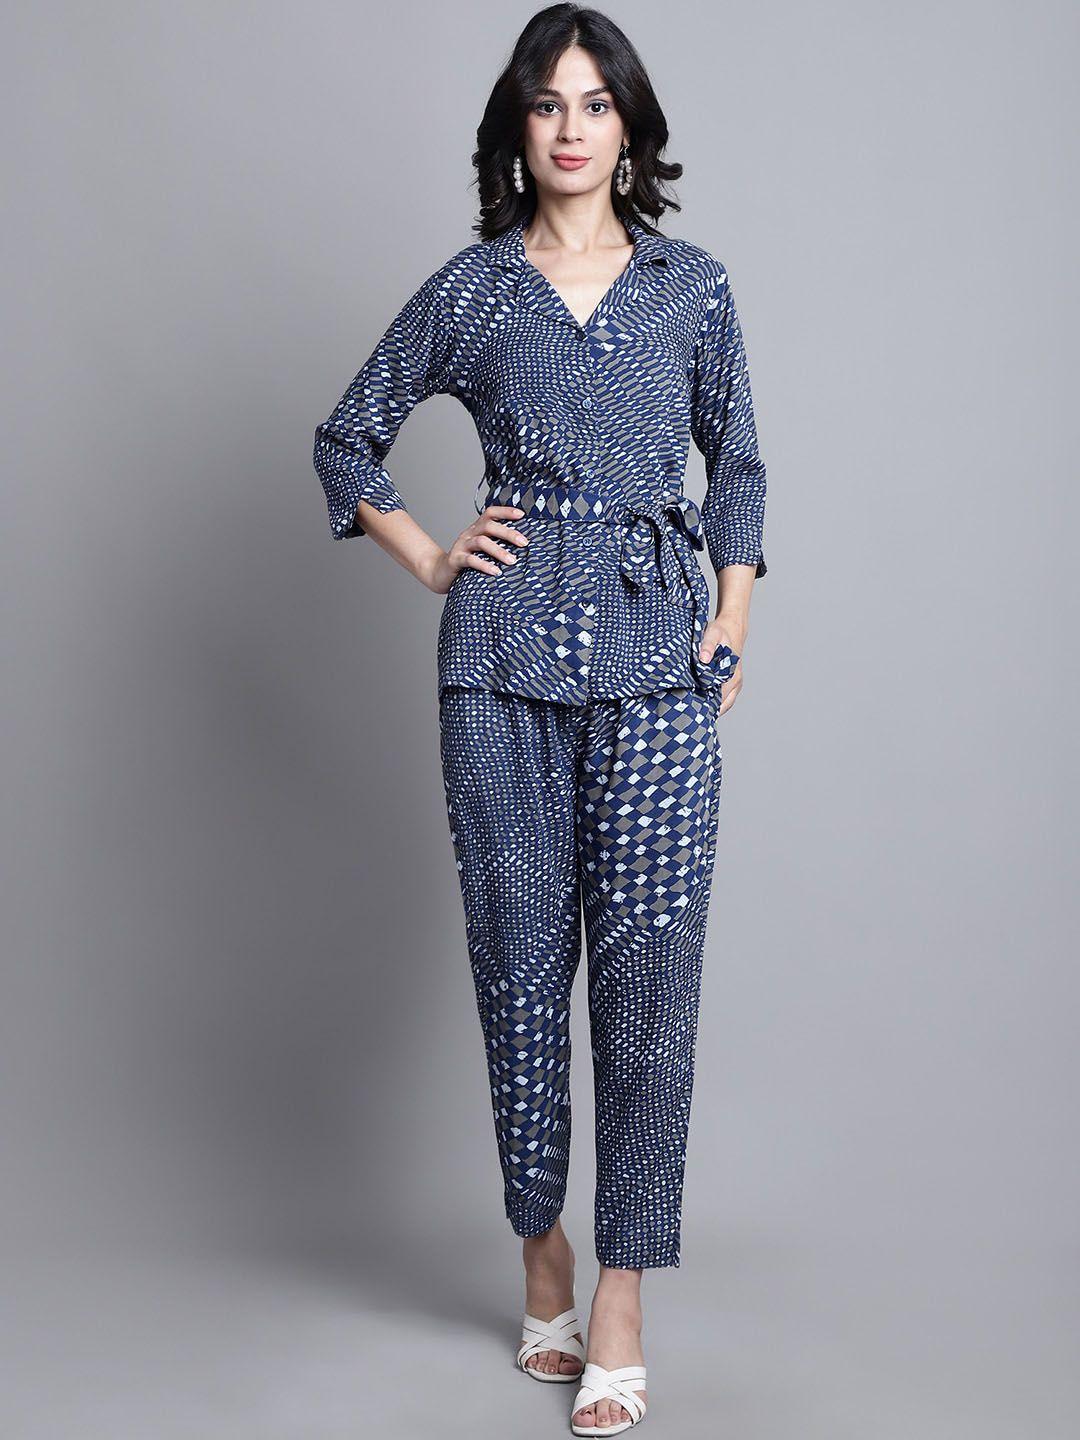 kalini geometric printed shirt with trousers co-ords